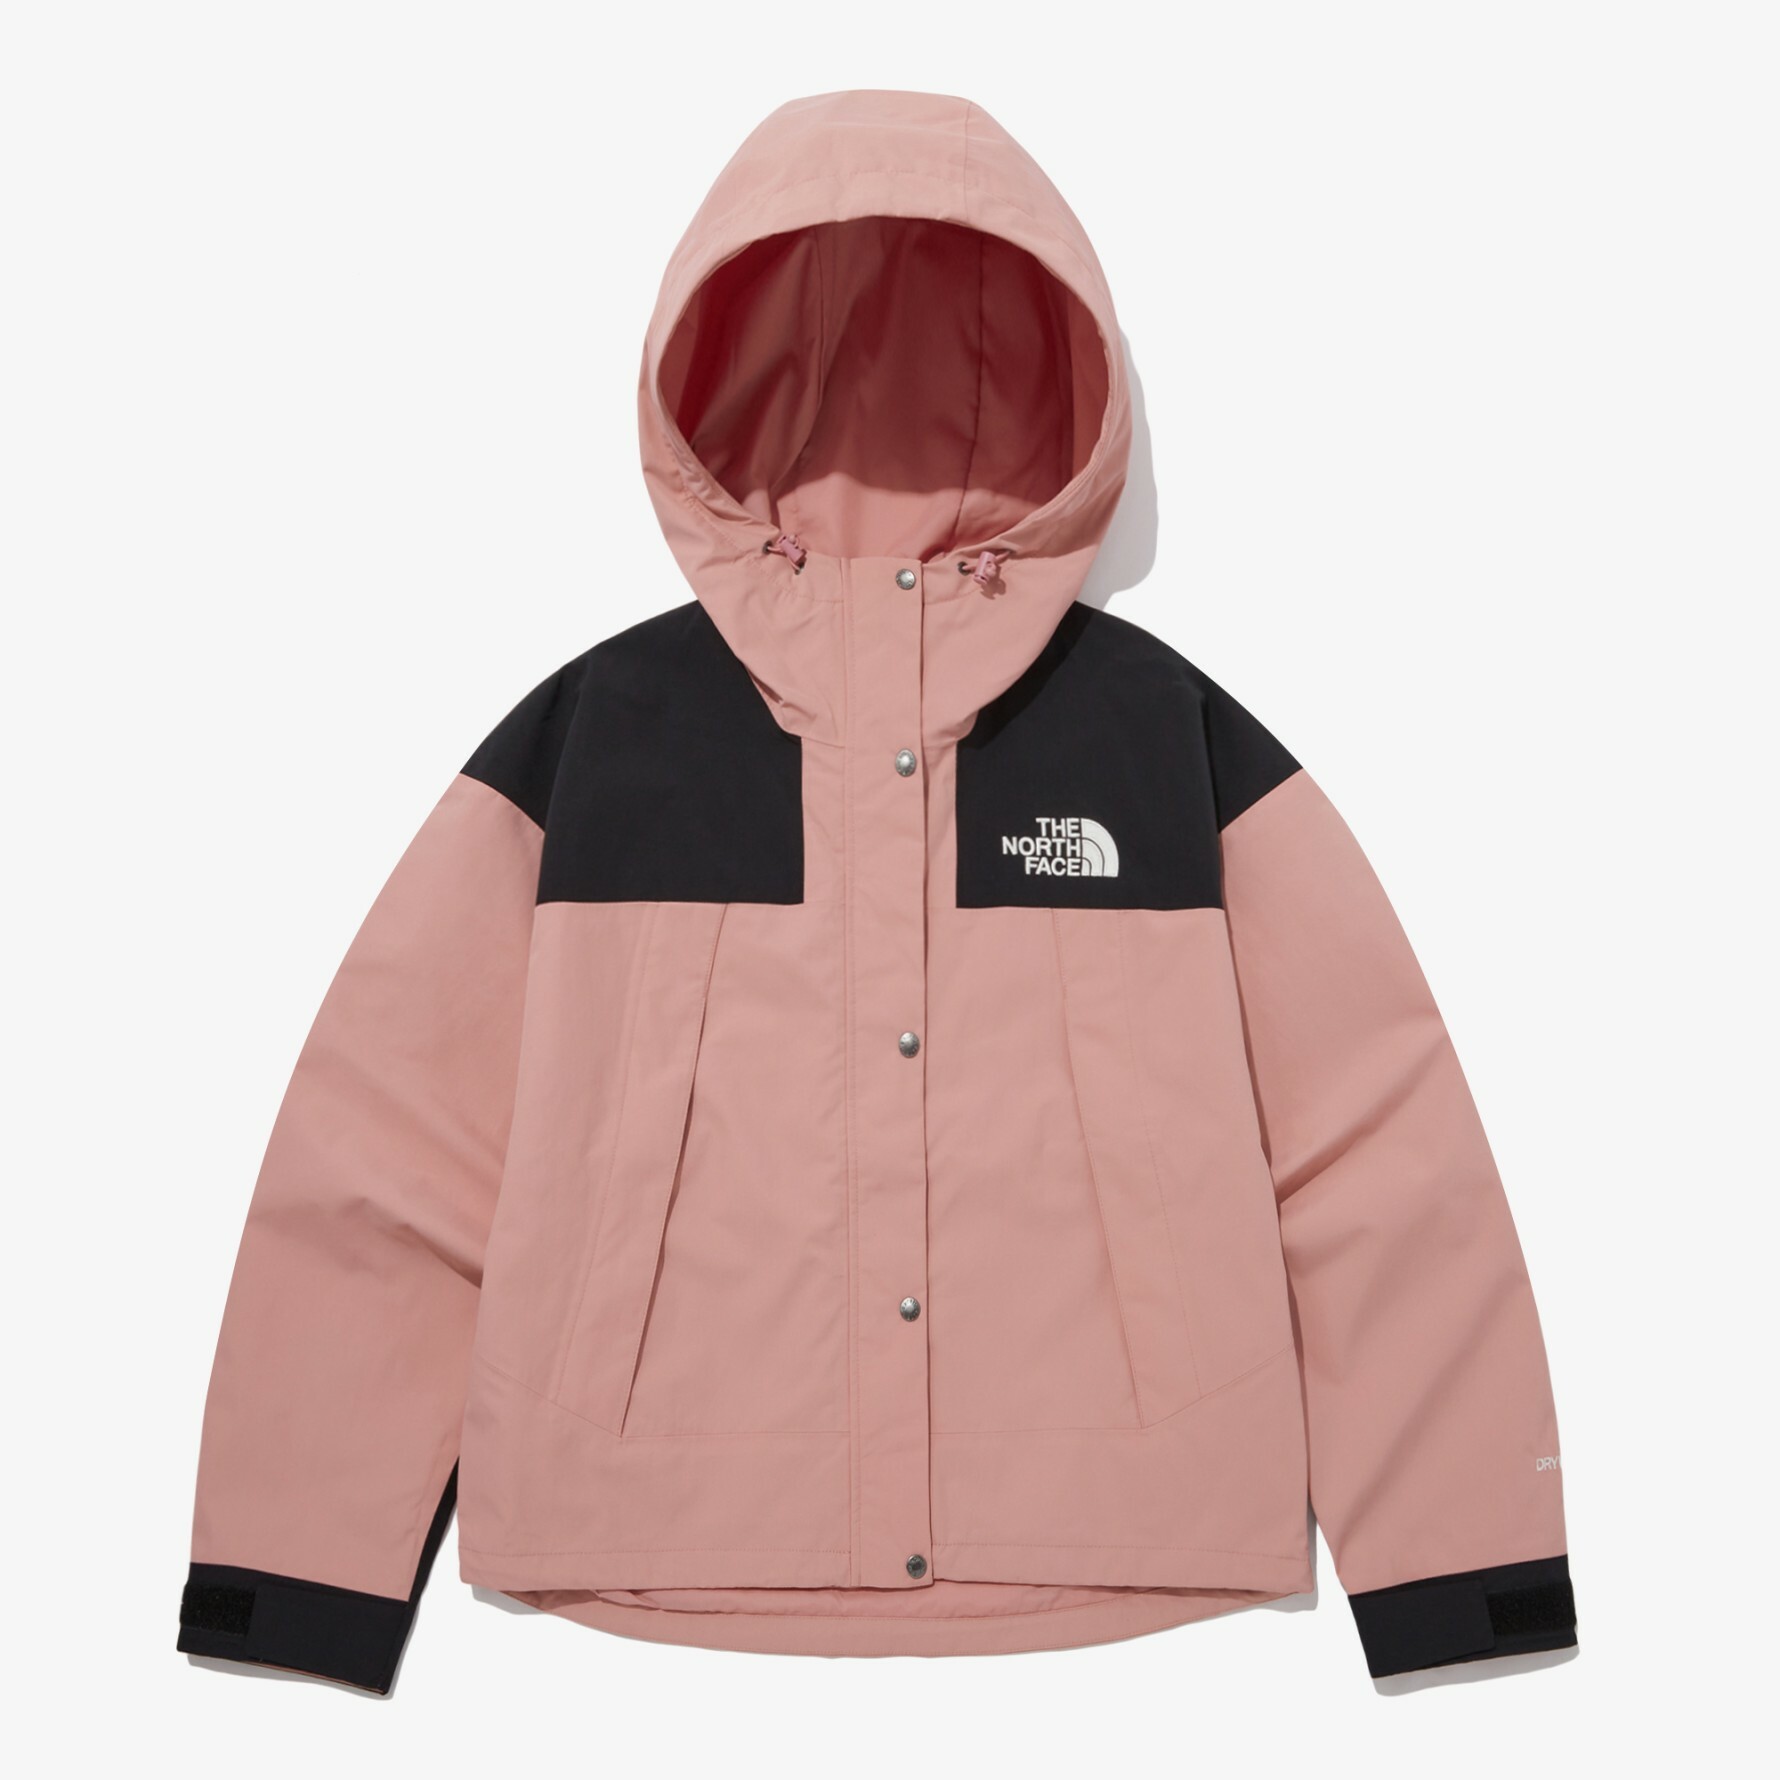 THE NORTH FACE MOUNTAIN JACKET